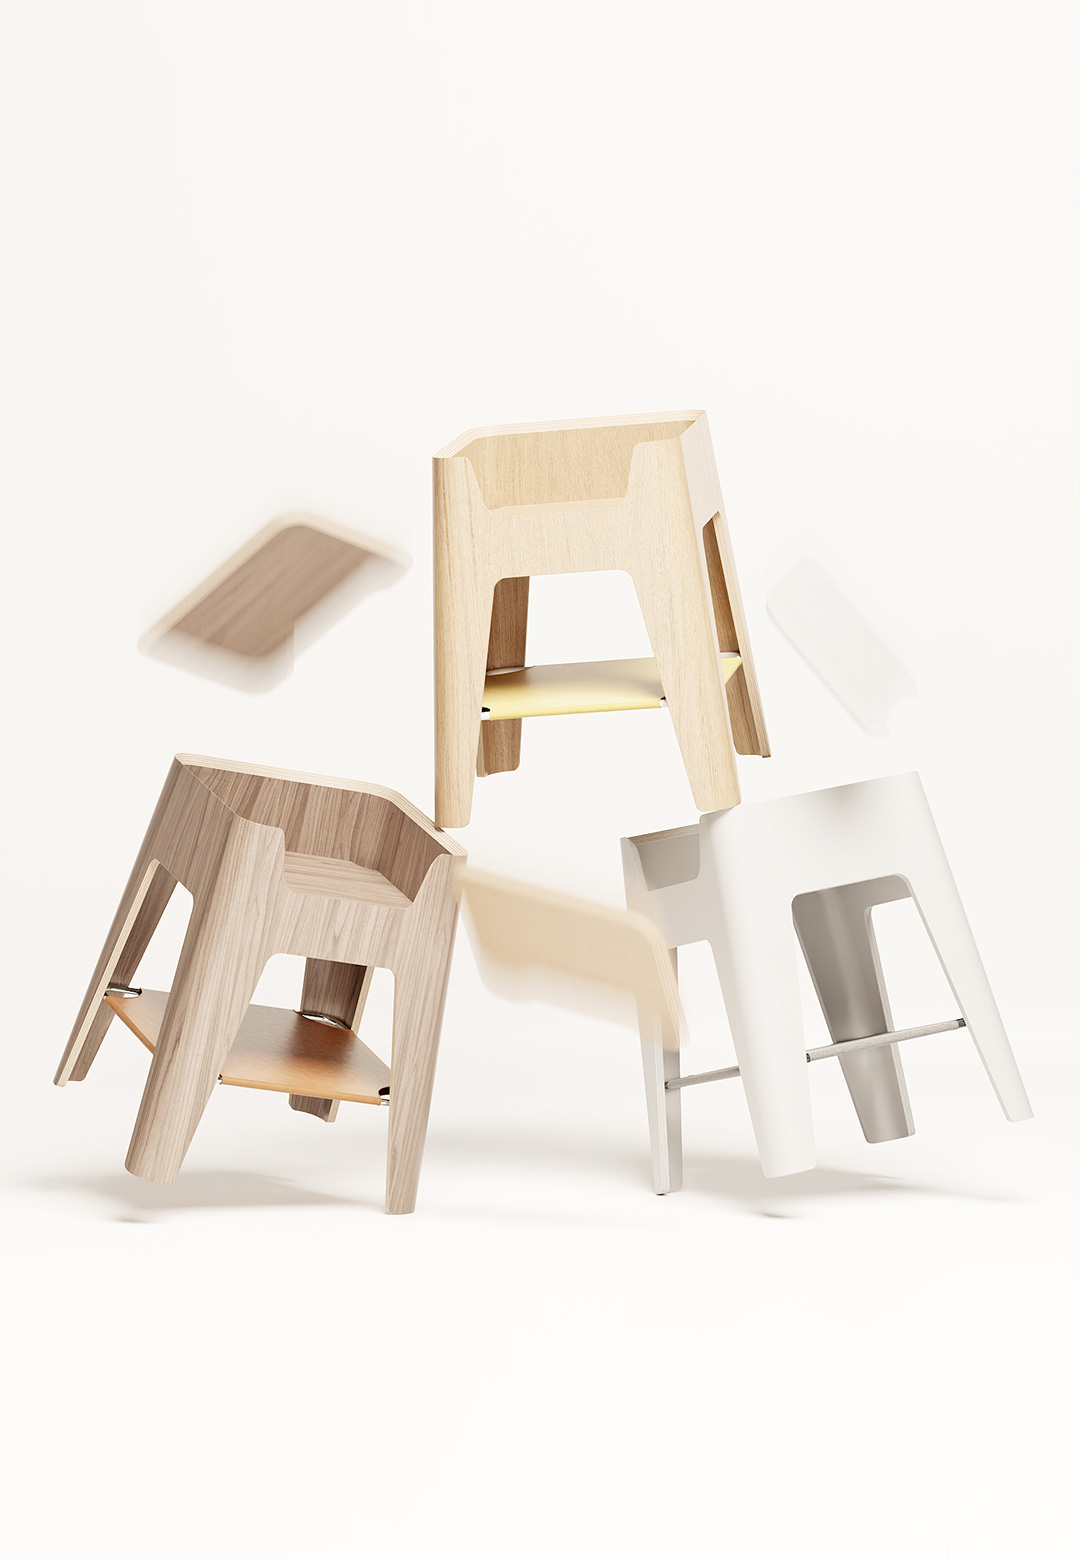 Latest from Teixeira Design Studio: <br>cat-friendly tables to stackable seatings